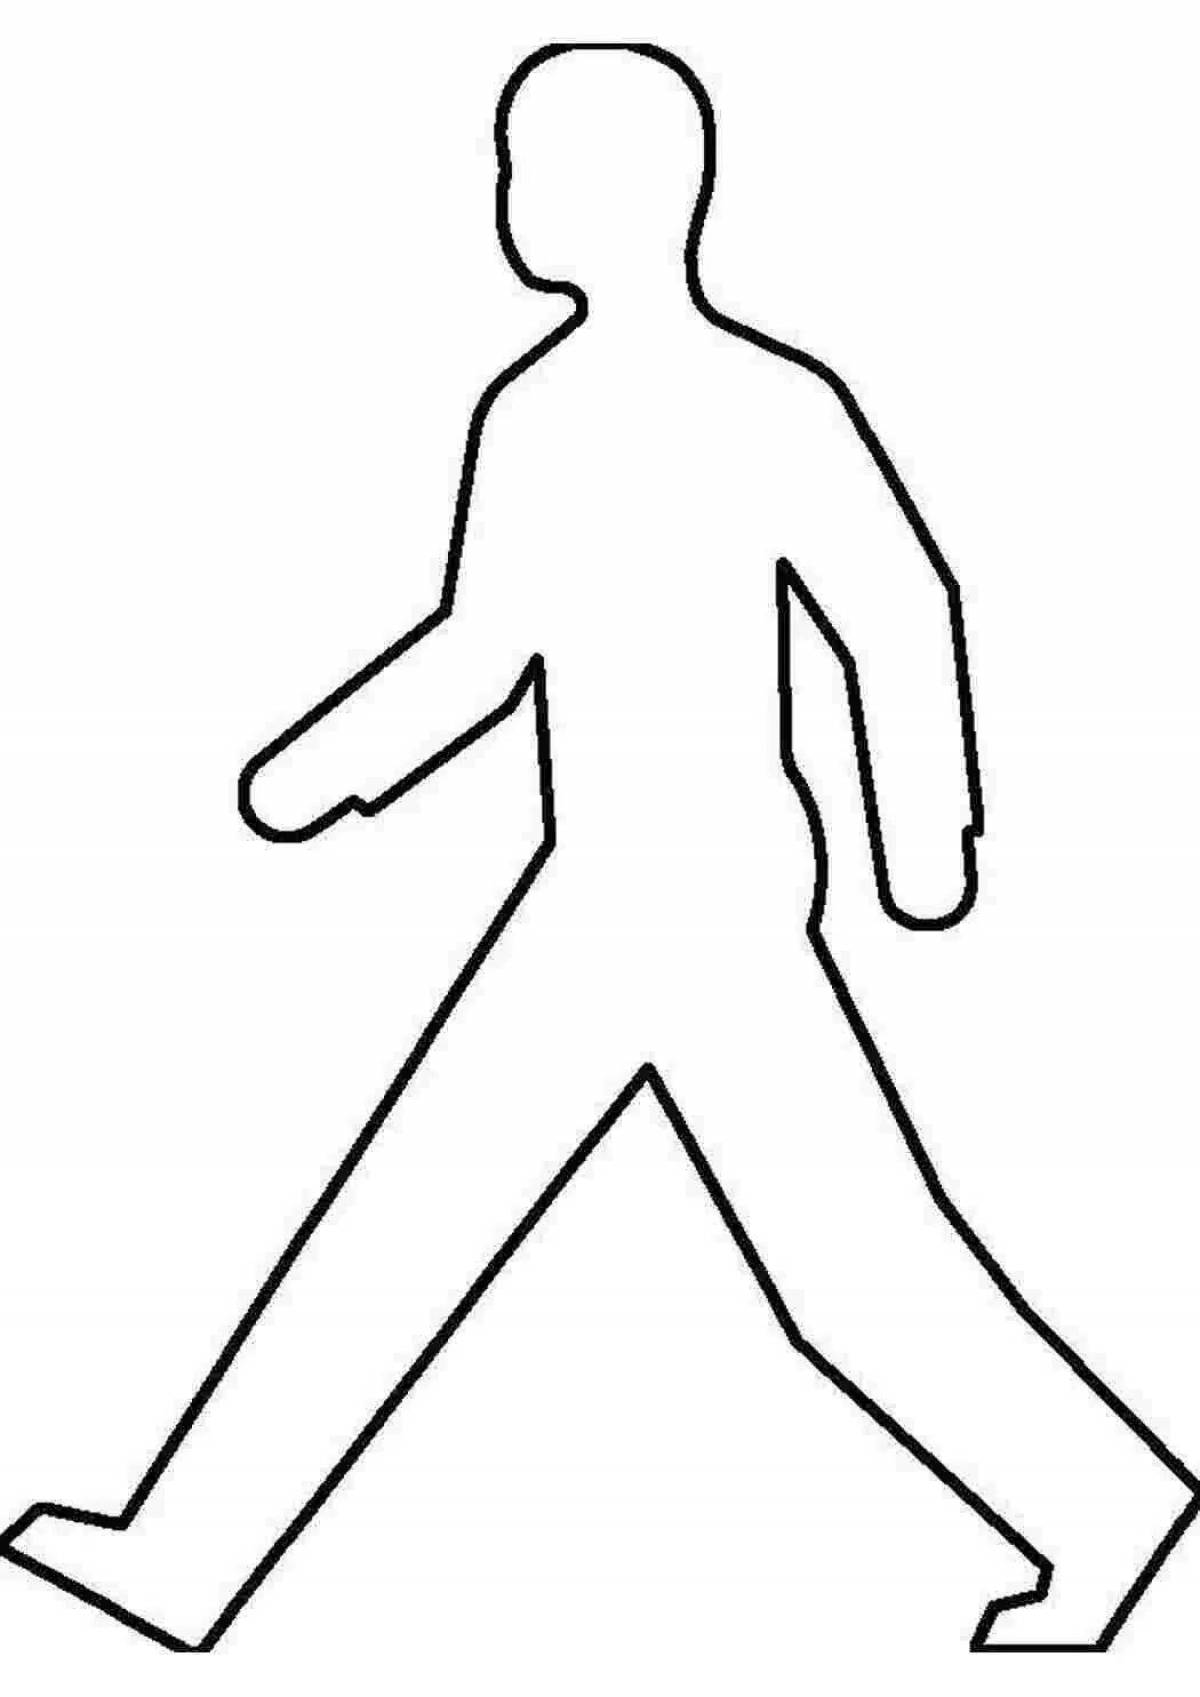 Coloring page mysterious human figure